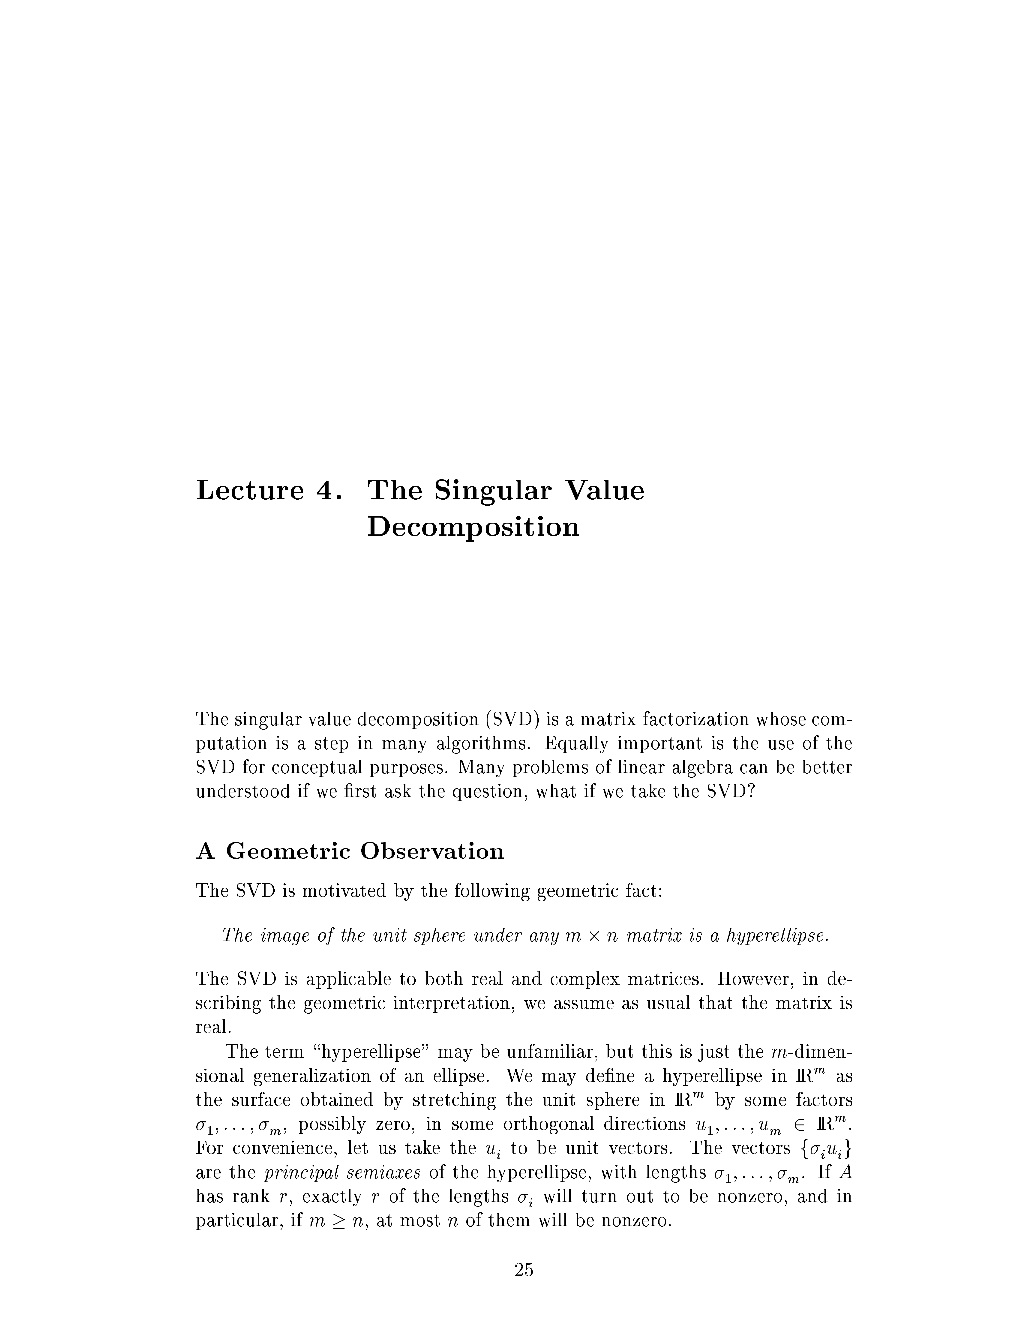 Lecture 4. the Singular Value Decomposition